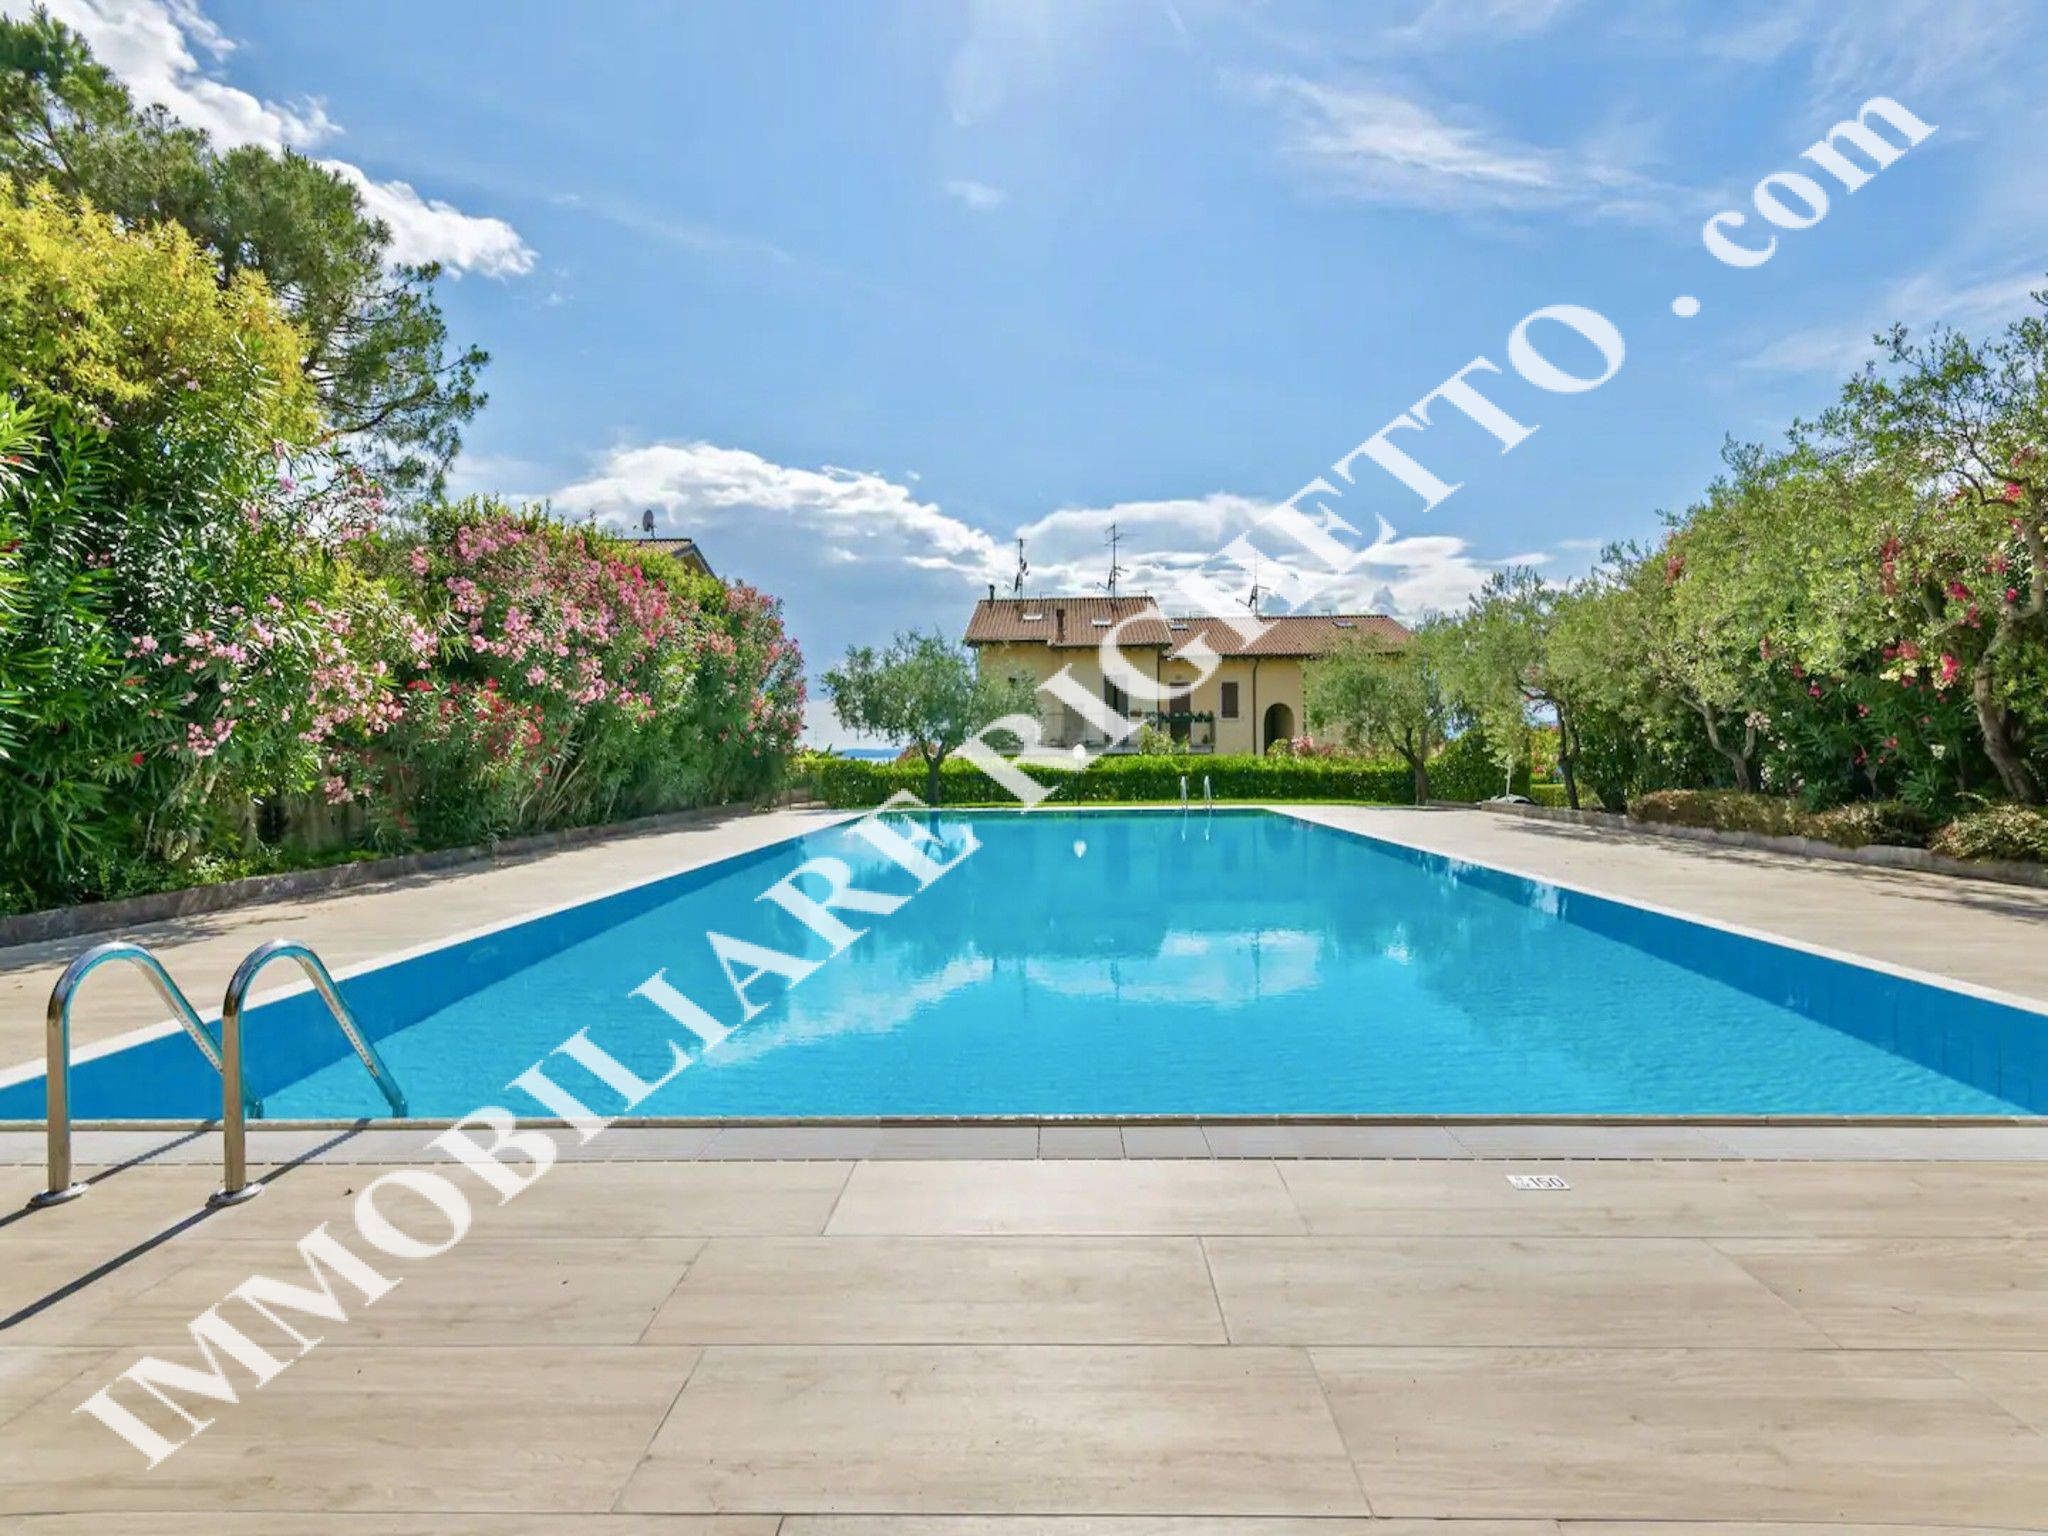 offer real estate for sale Spacious flat in elegant complex with swimming-pool.